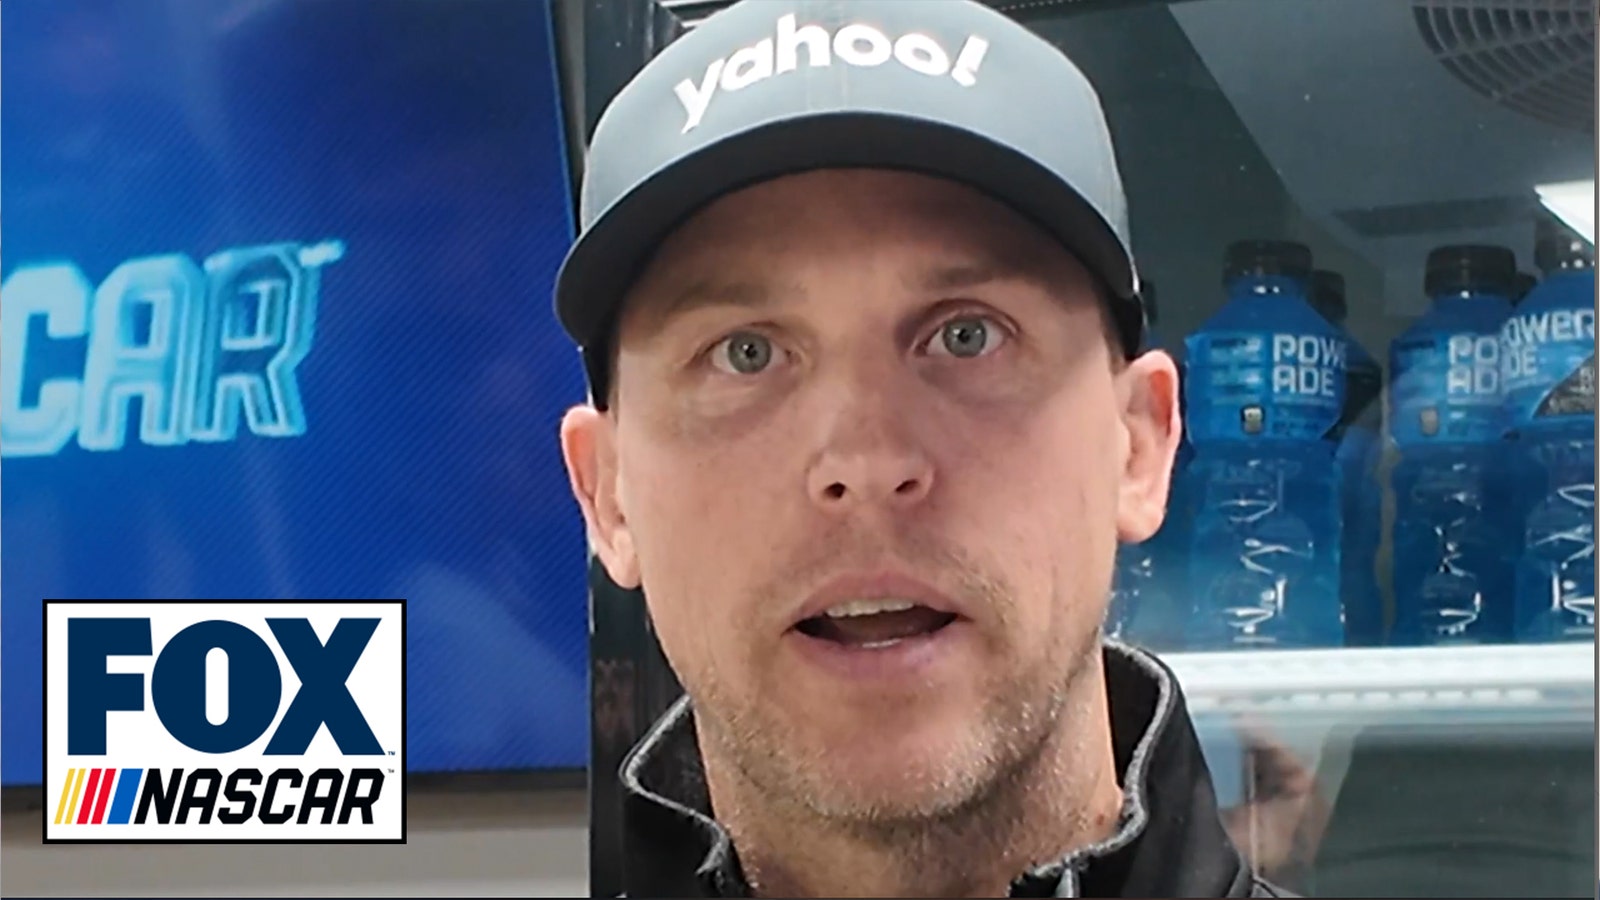 Denny Hamlin on Corey Heim's expectations for driving the No. 50 23XI Racing car this week